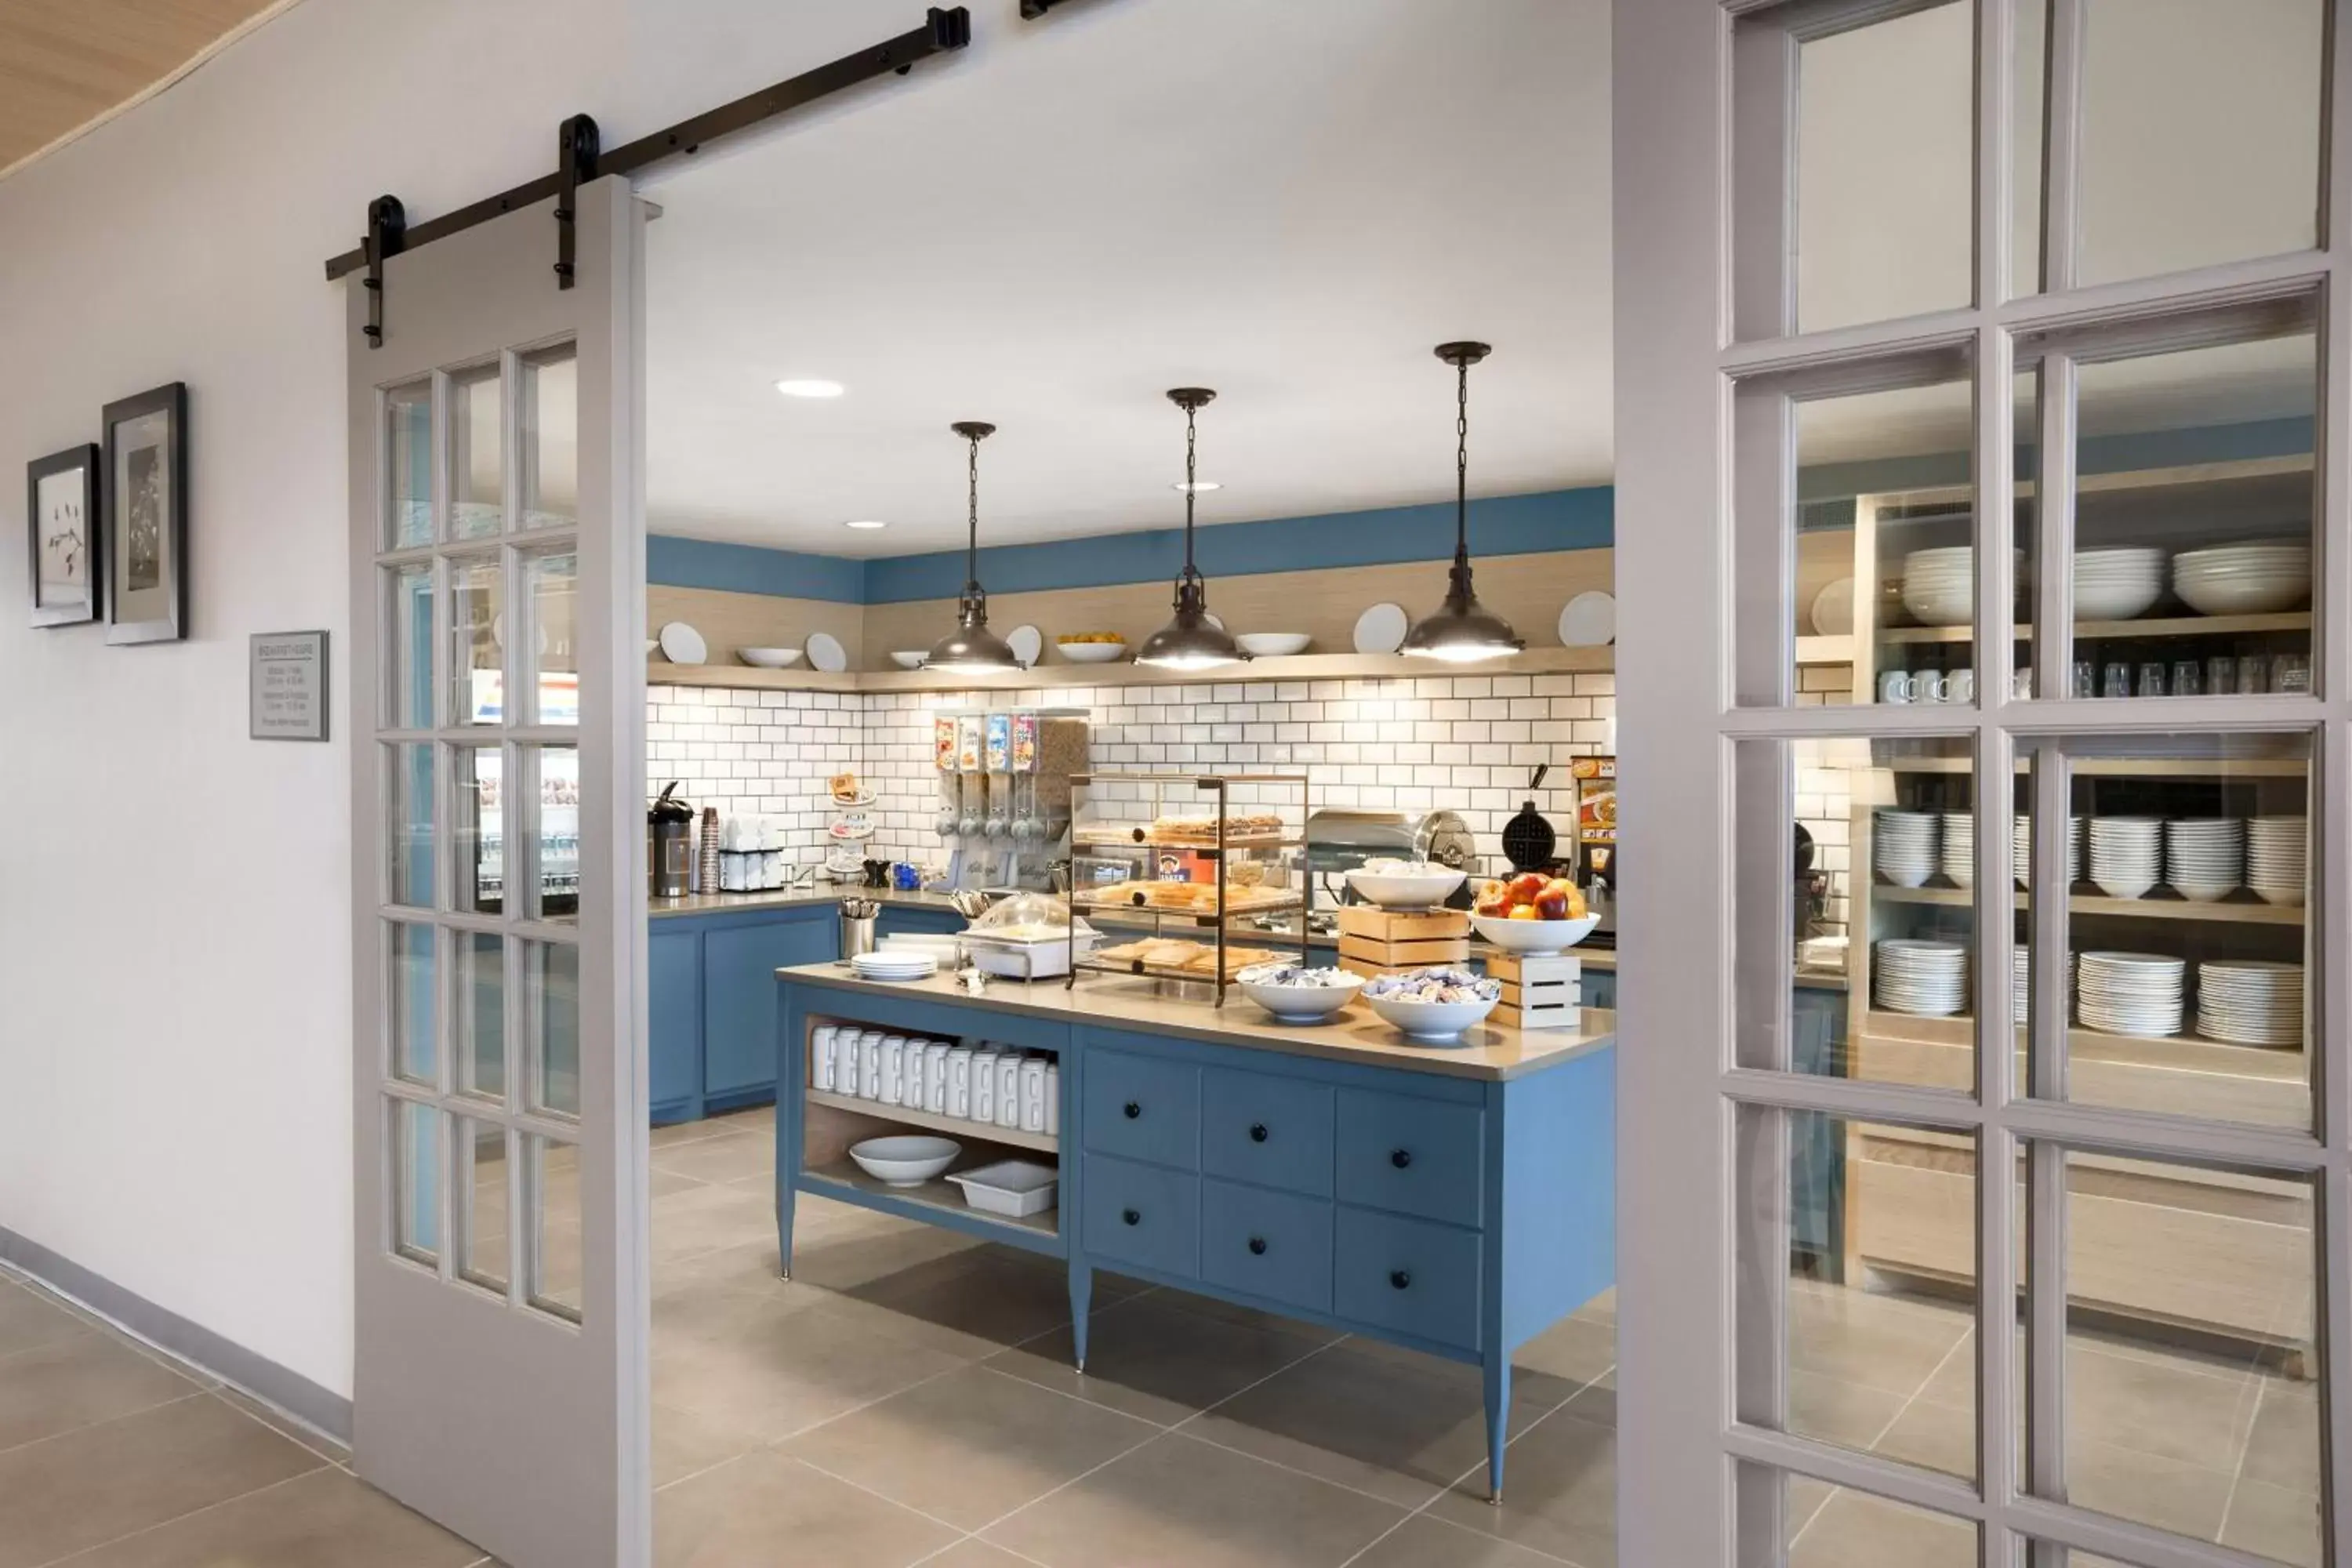 Communal kitchen in Country Inn & Suites by Radisson, Indianola, IA